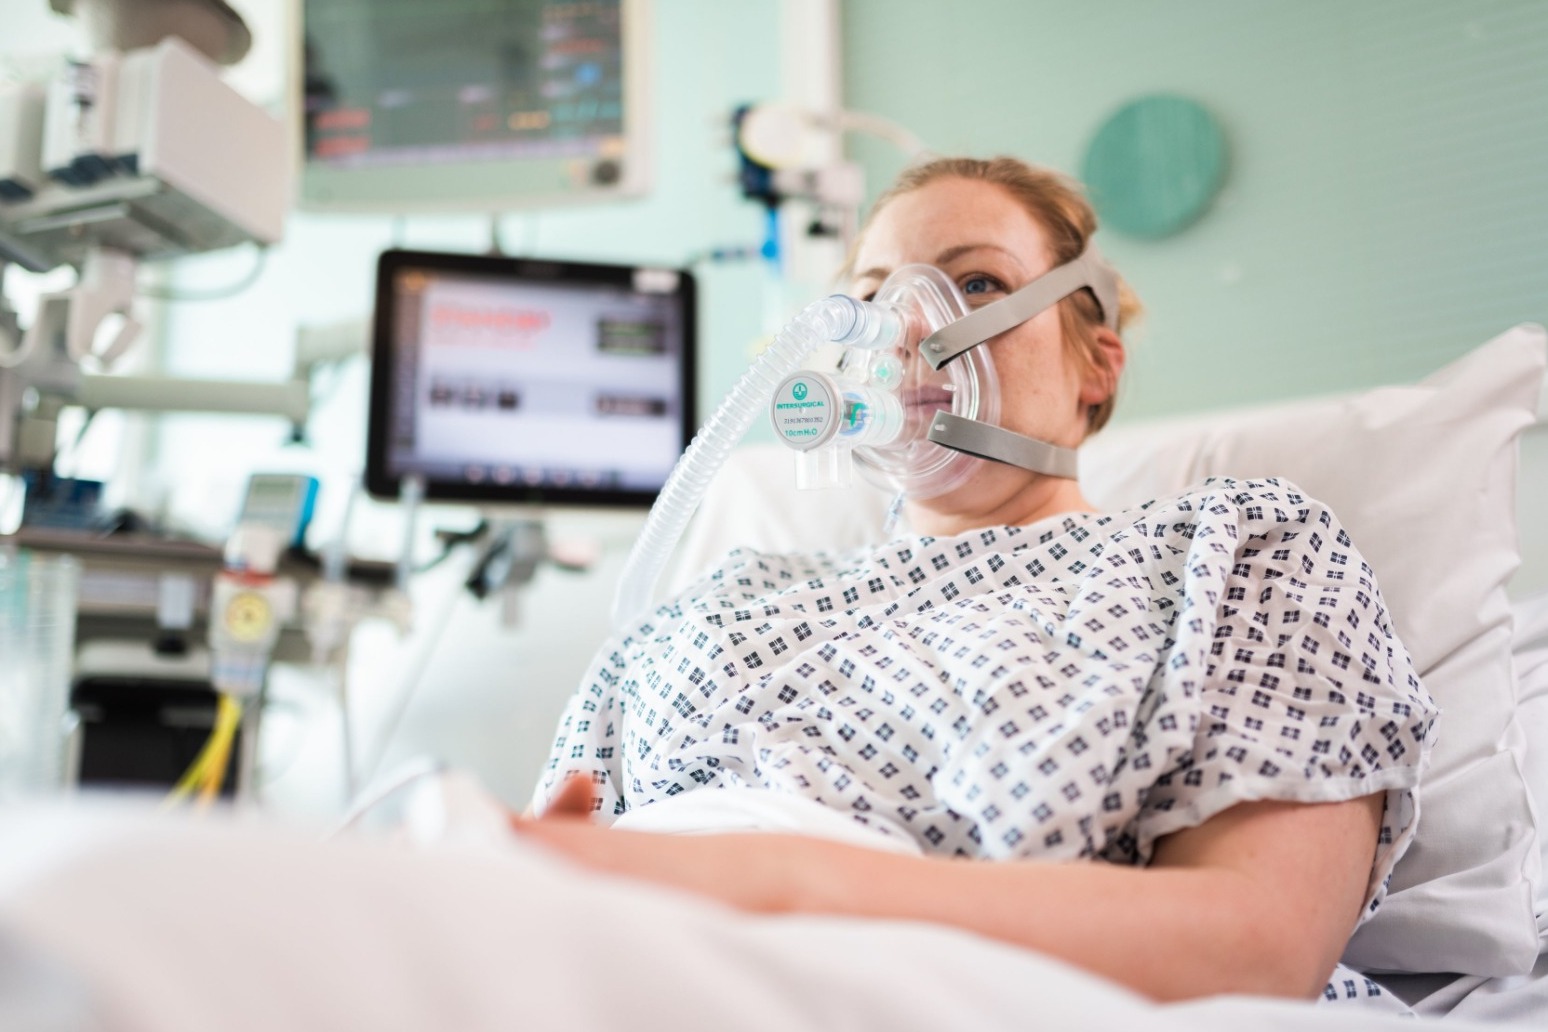 Breathing machine developed in under 100 hours to help Covid-19 patients 